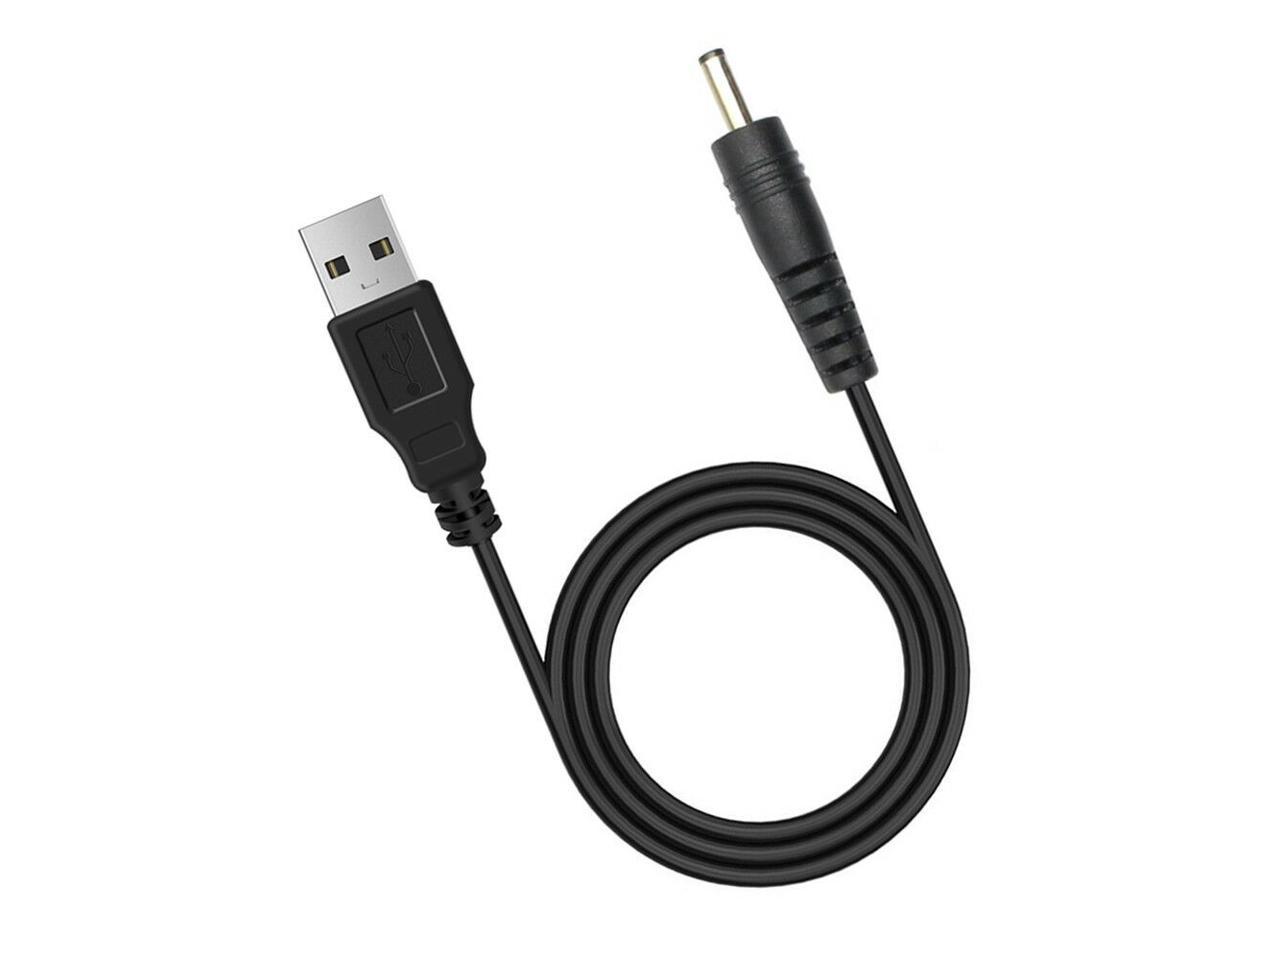 USB to 2.5mm Charging Cable Charger Cord for Smartab Zeki Alldaymall Tablet